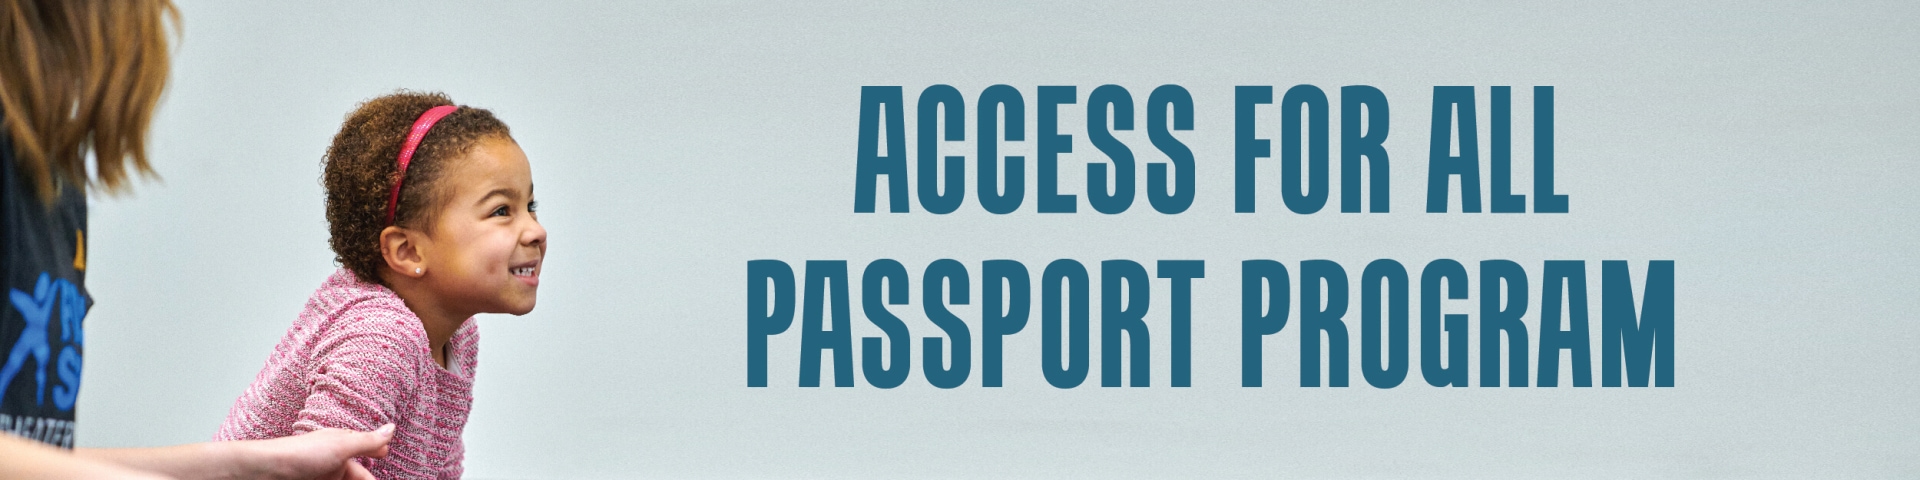 Access for All Passport